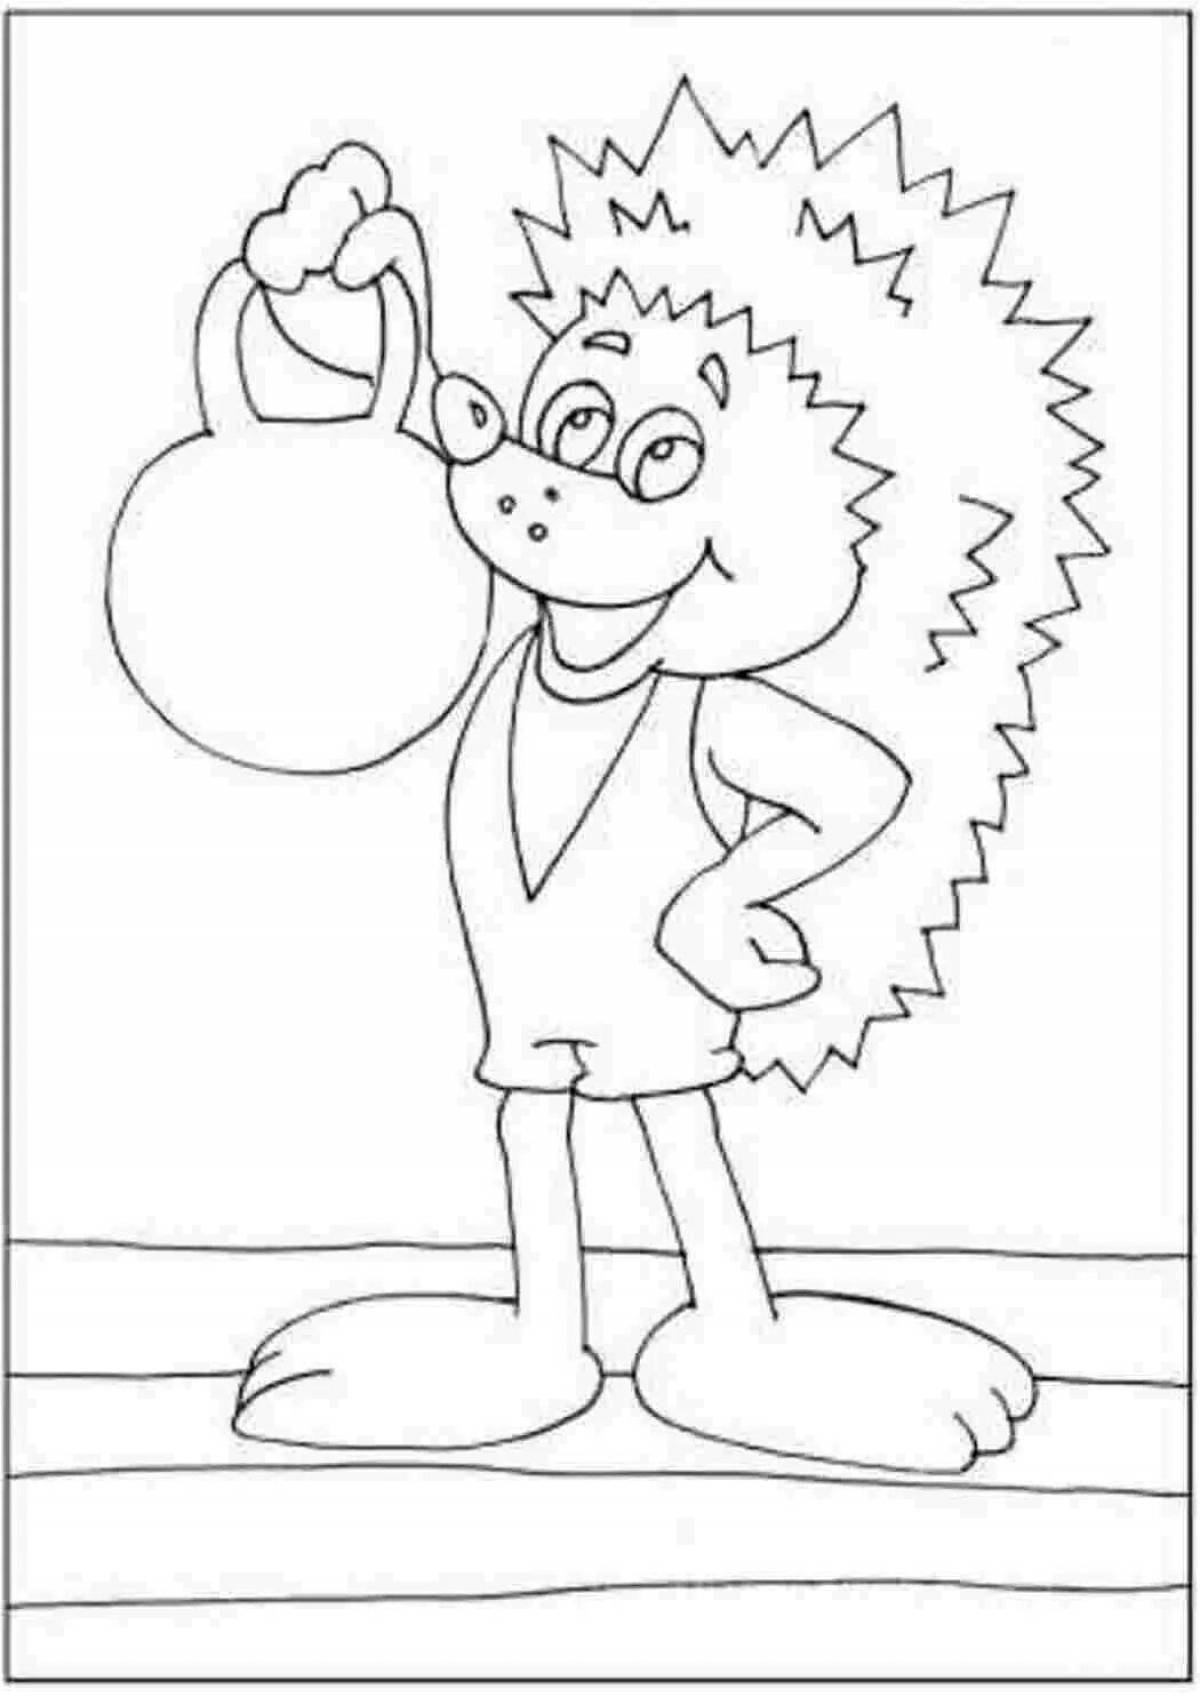 Shining Health coloring page